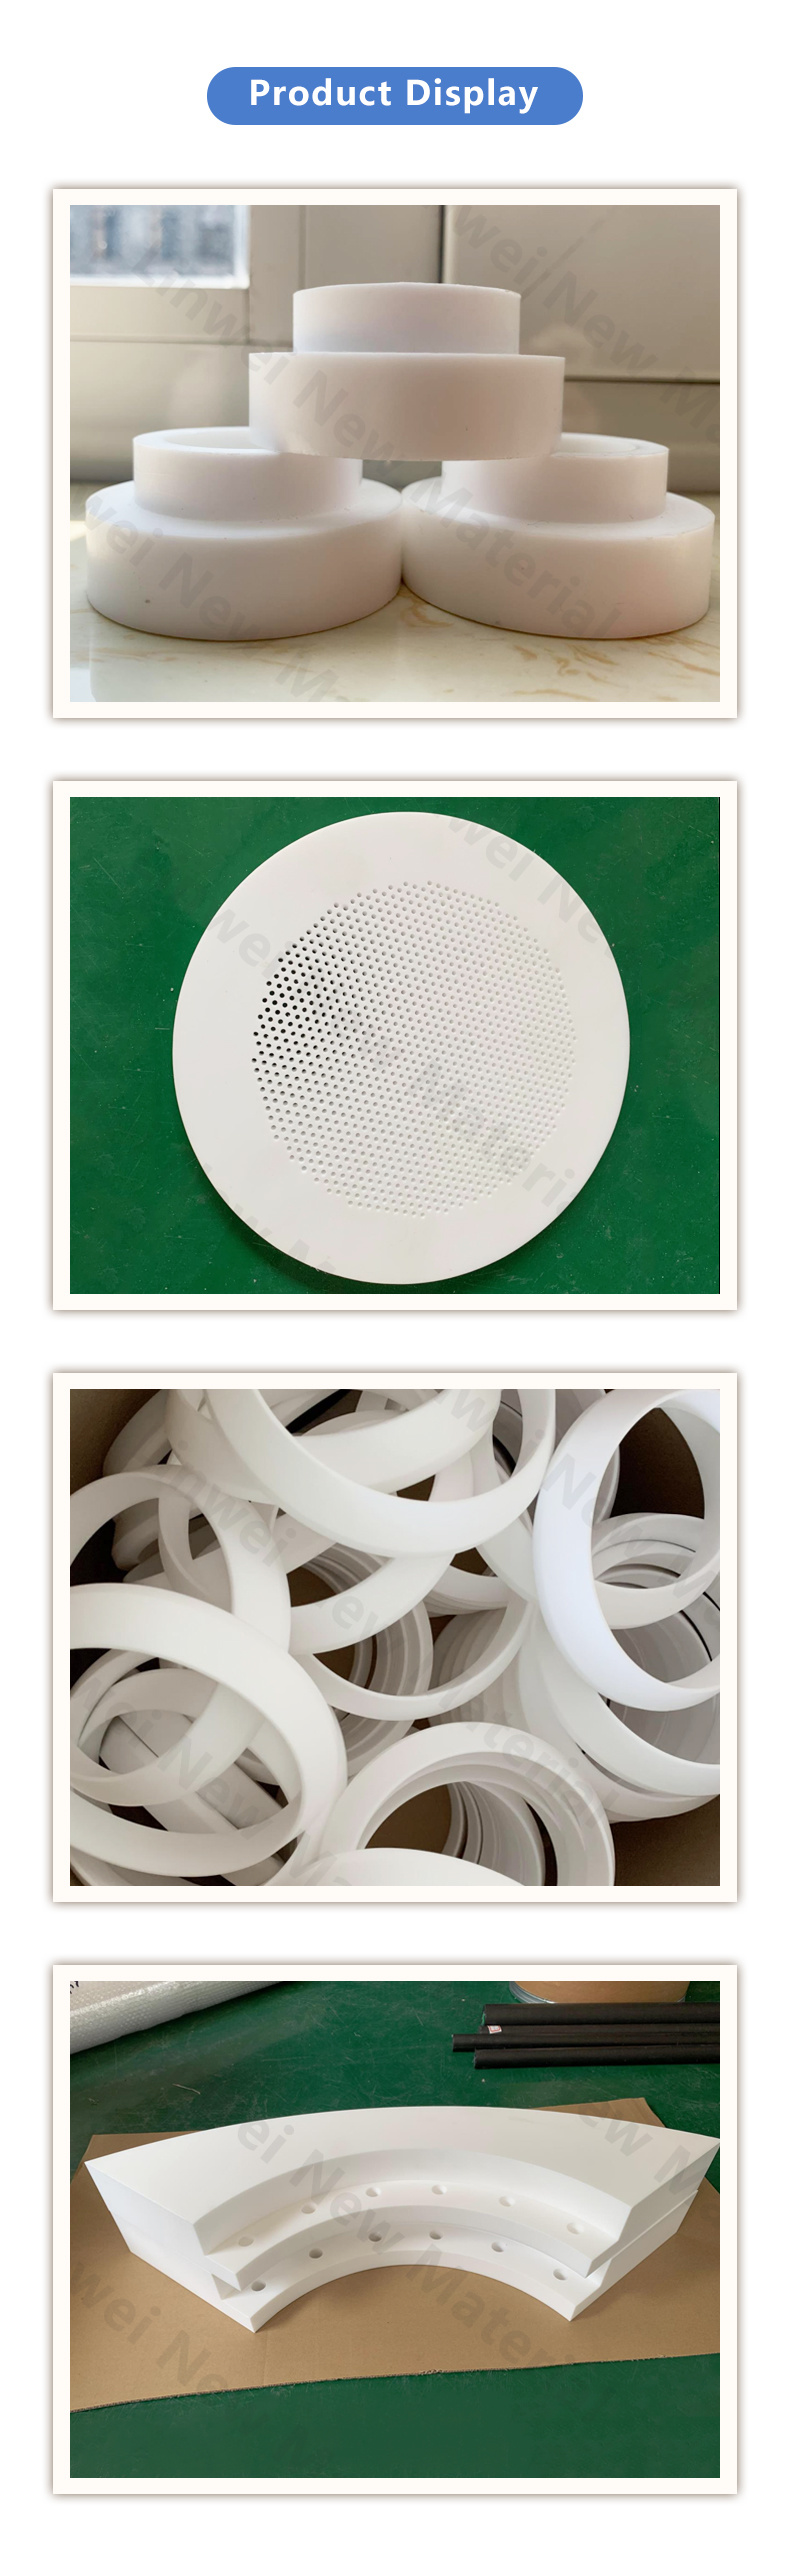 High Temperature Resistant and Non-Adhesive PTFE Parts